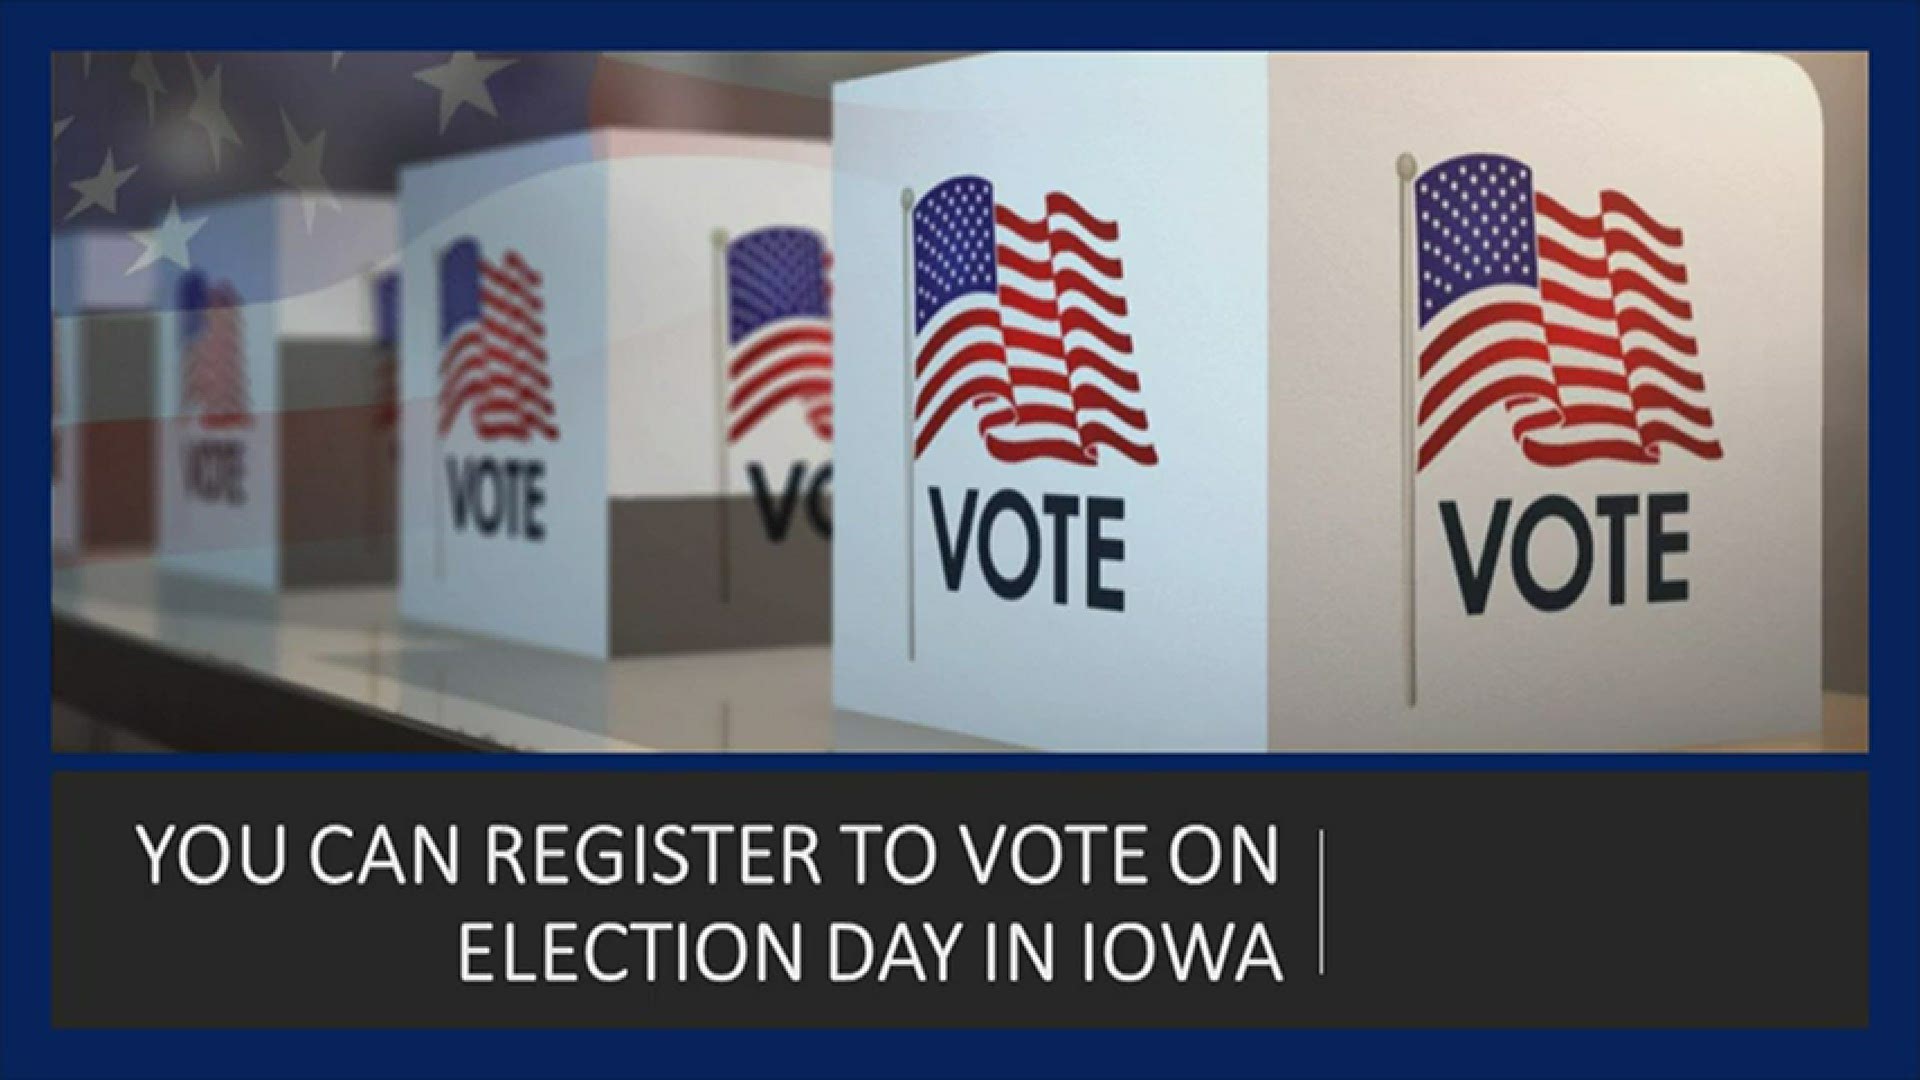 Polls in Iowa open Tuesday at 7 a.m. But if you haven't registered to vote yet, that's OK.